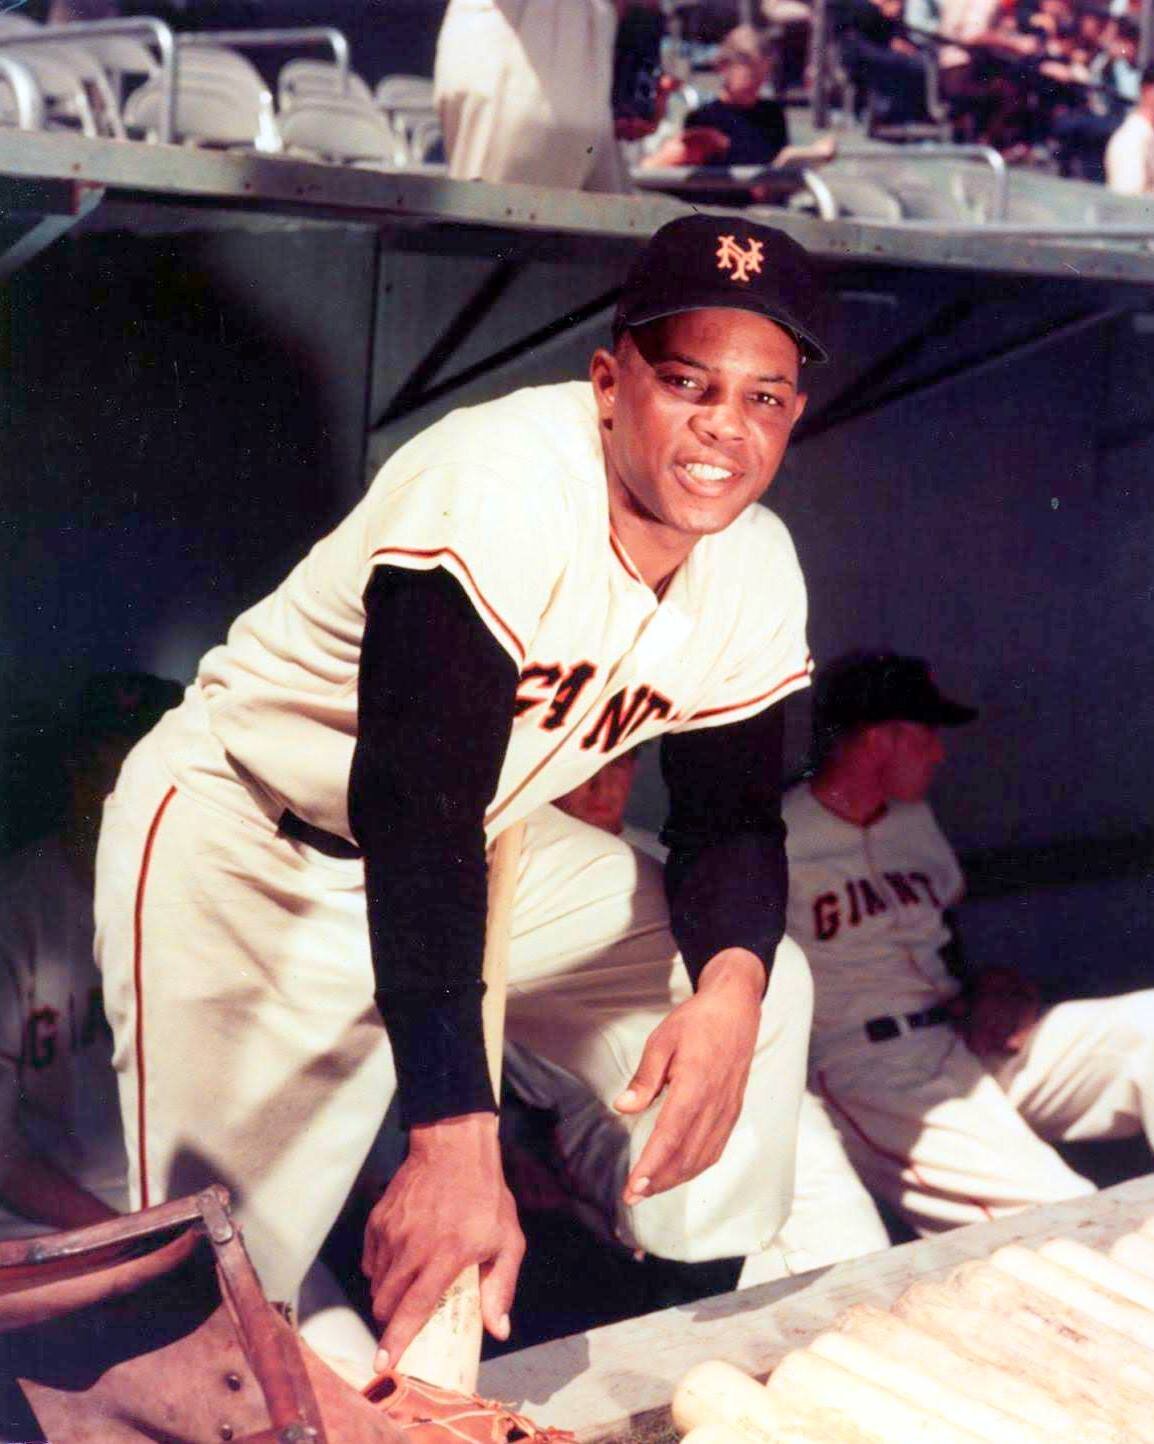 sf giants willie mays jersey